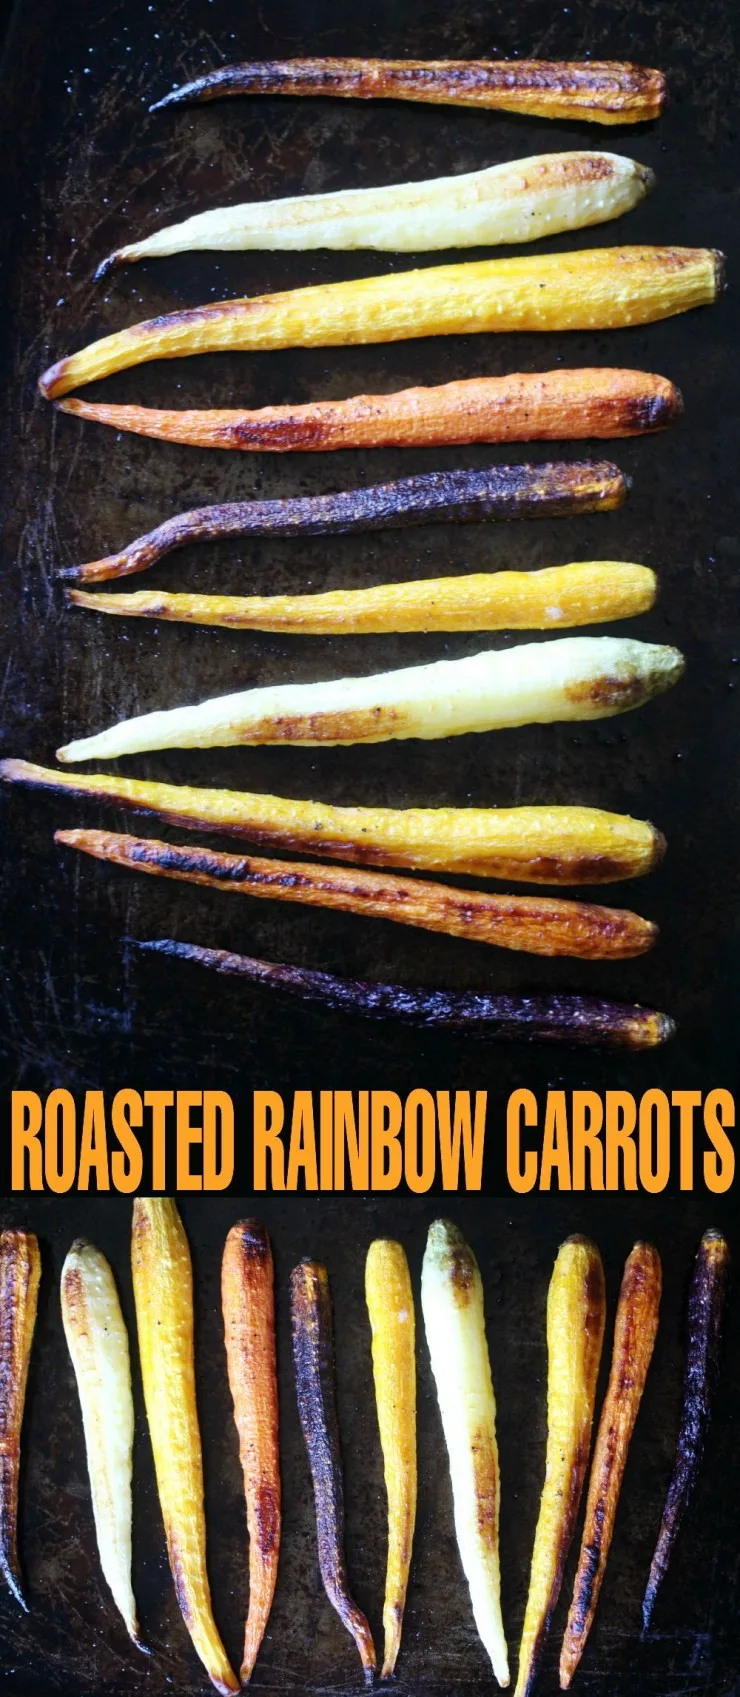 These Roasted Rainbow Carrots are a simple and delicious vegetable side dish. Everyone will love this healthy recipe!